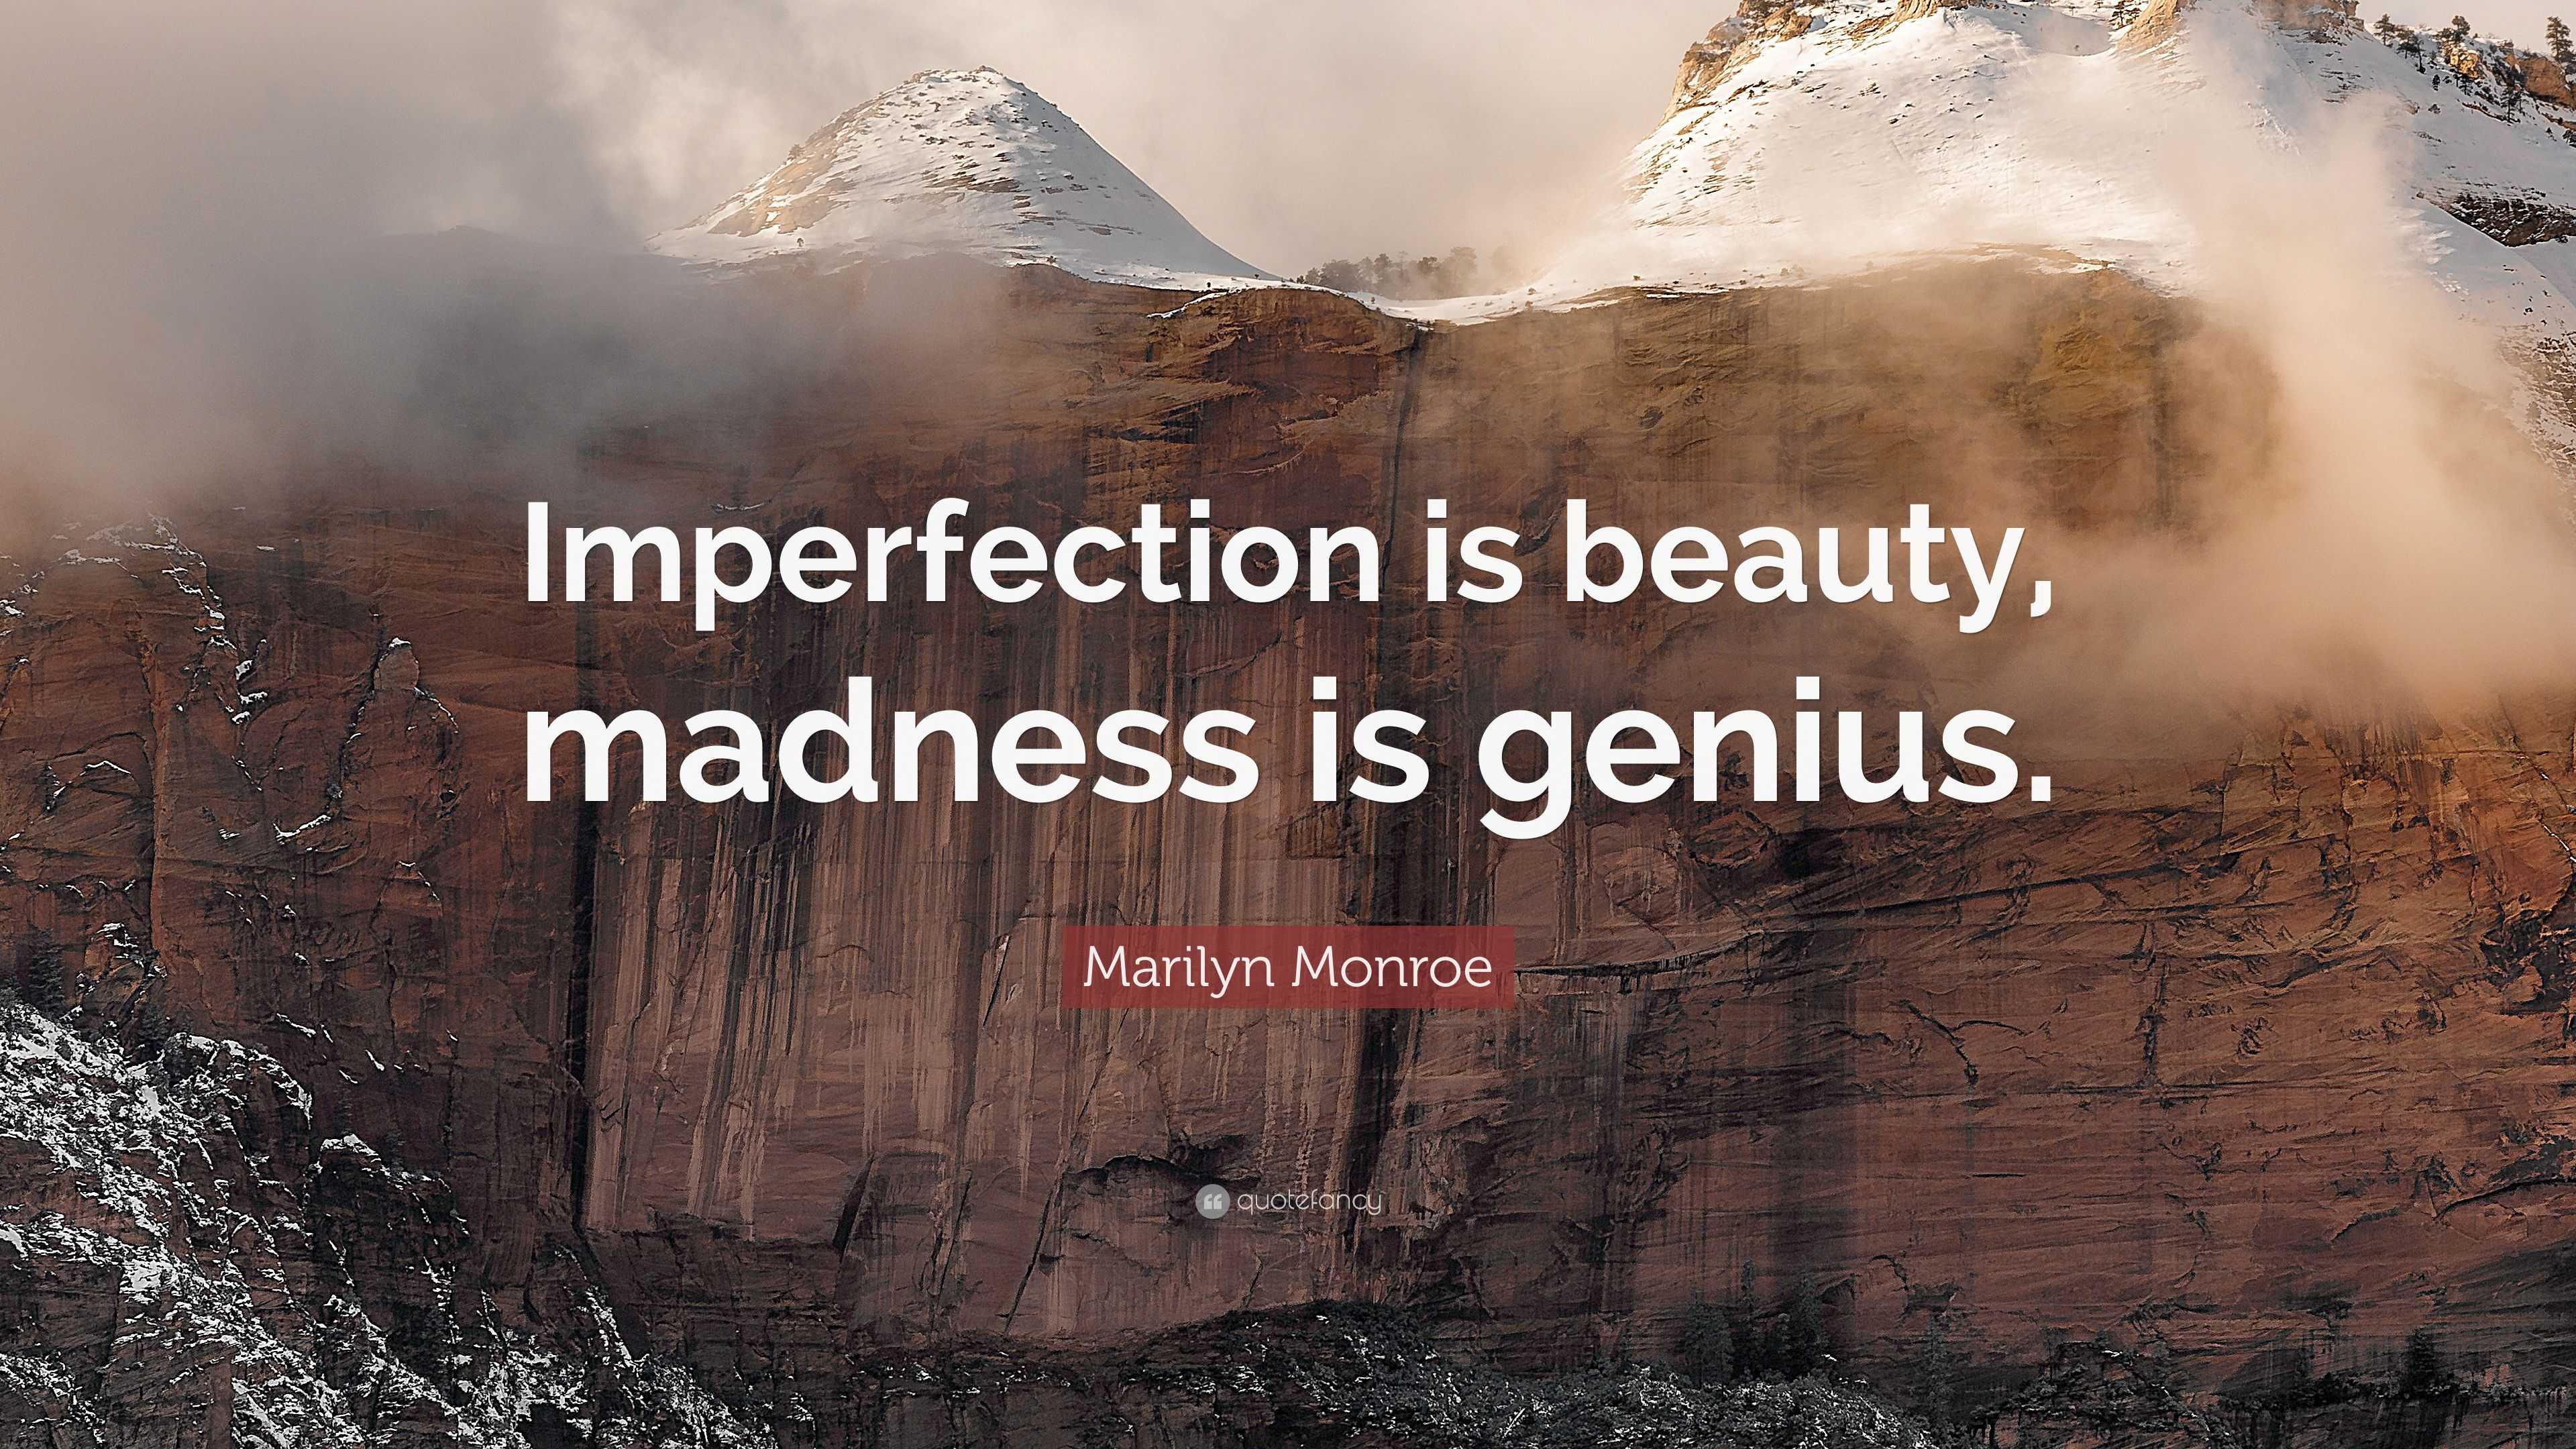 imperfection is beauty madness is genius background